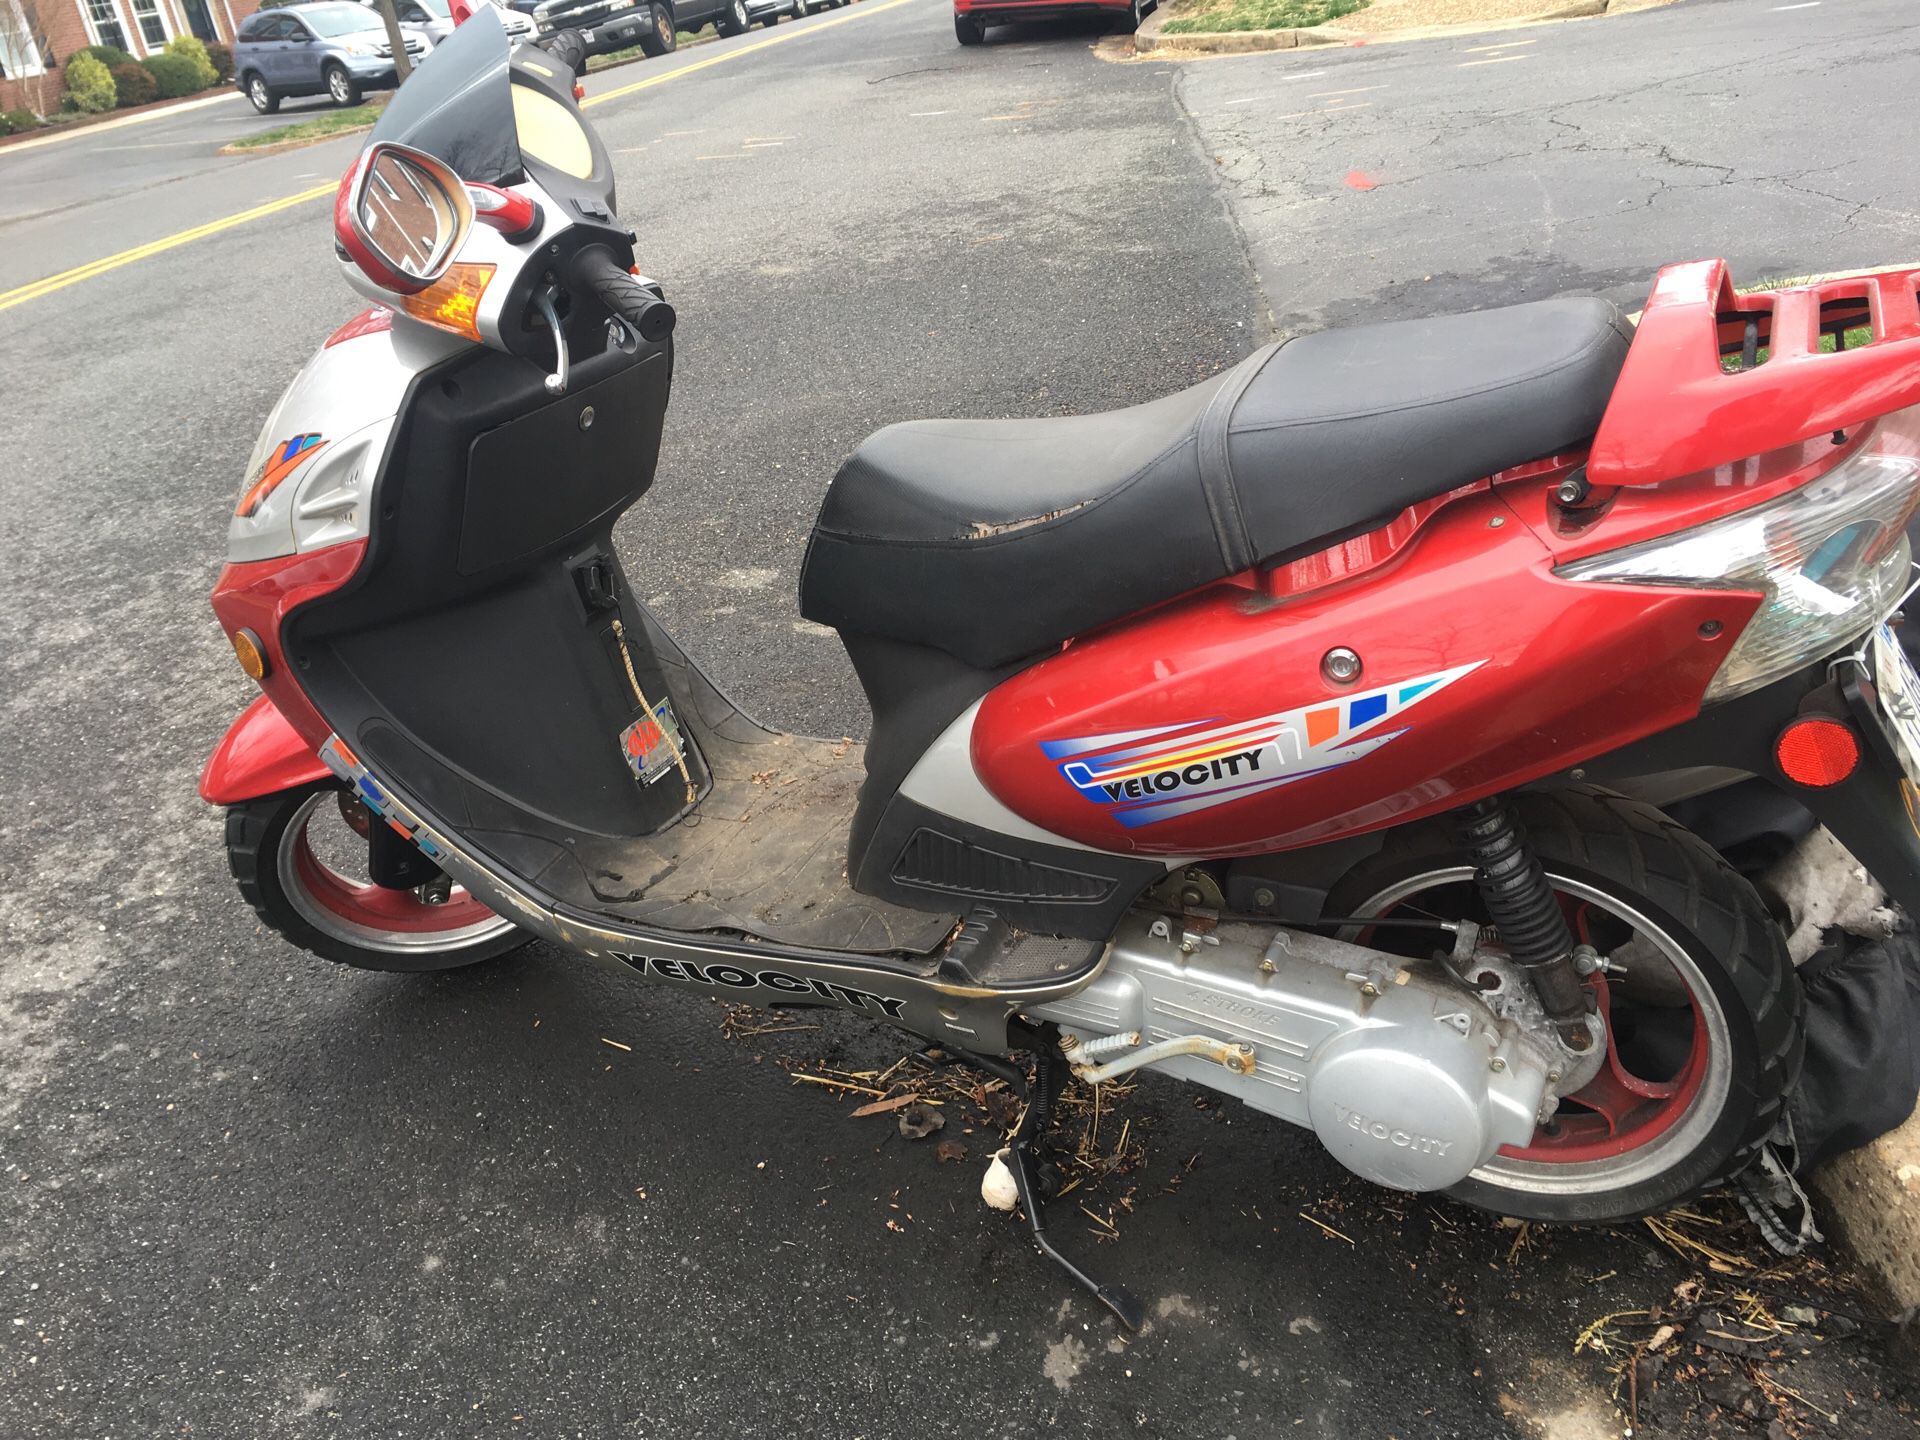 150cc Velocity scooter “moped” 2010